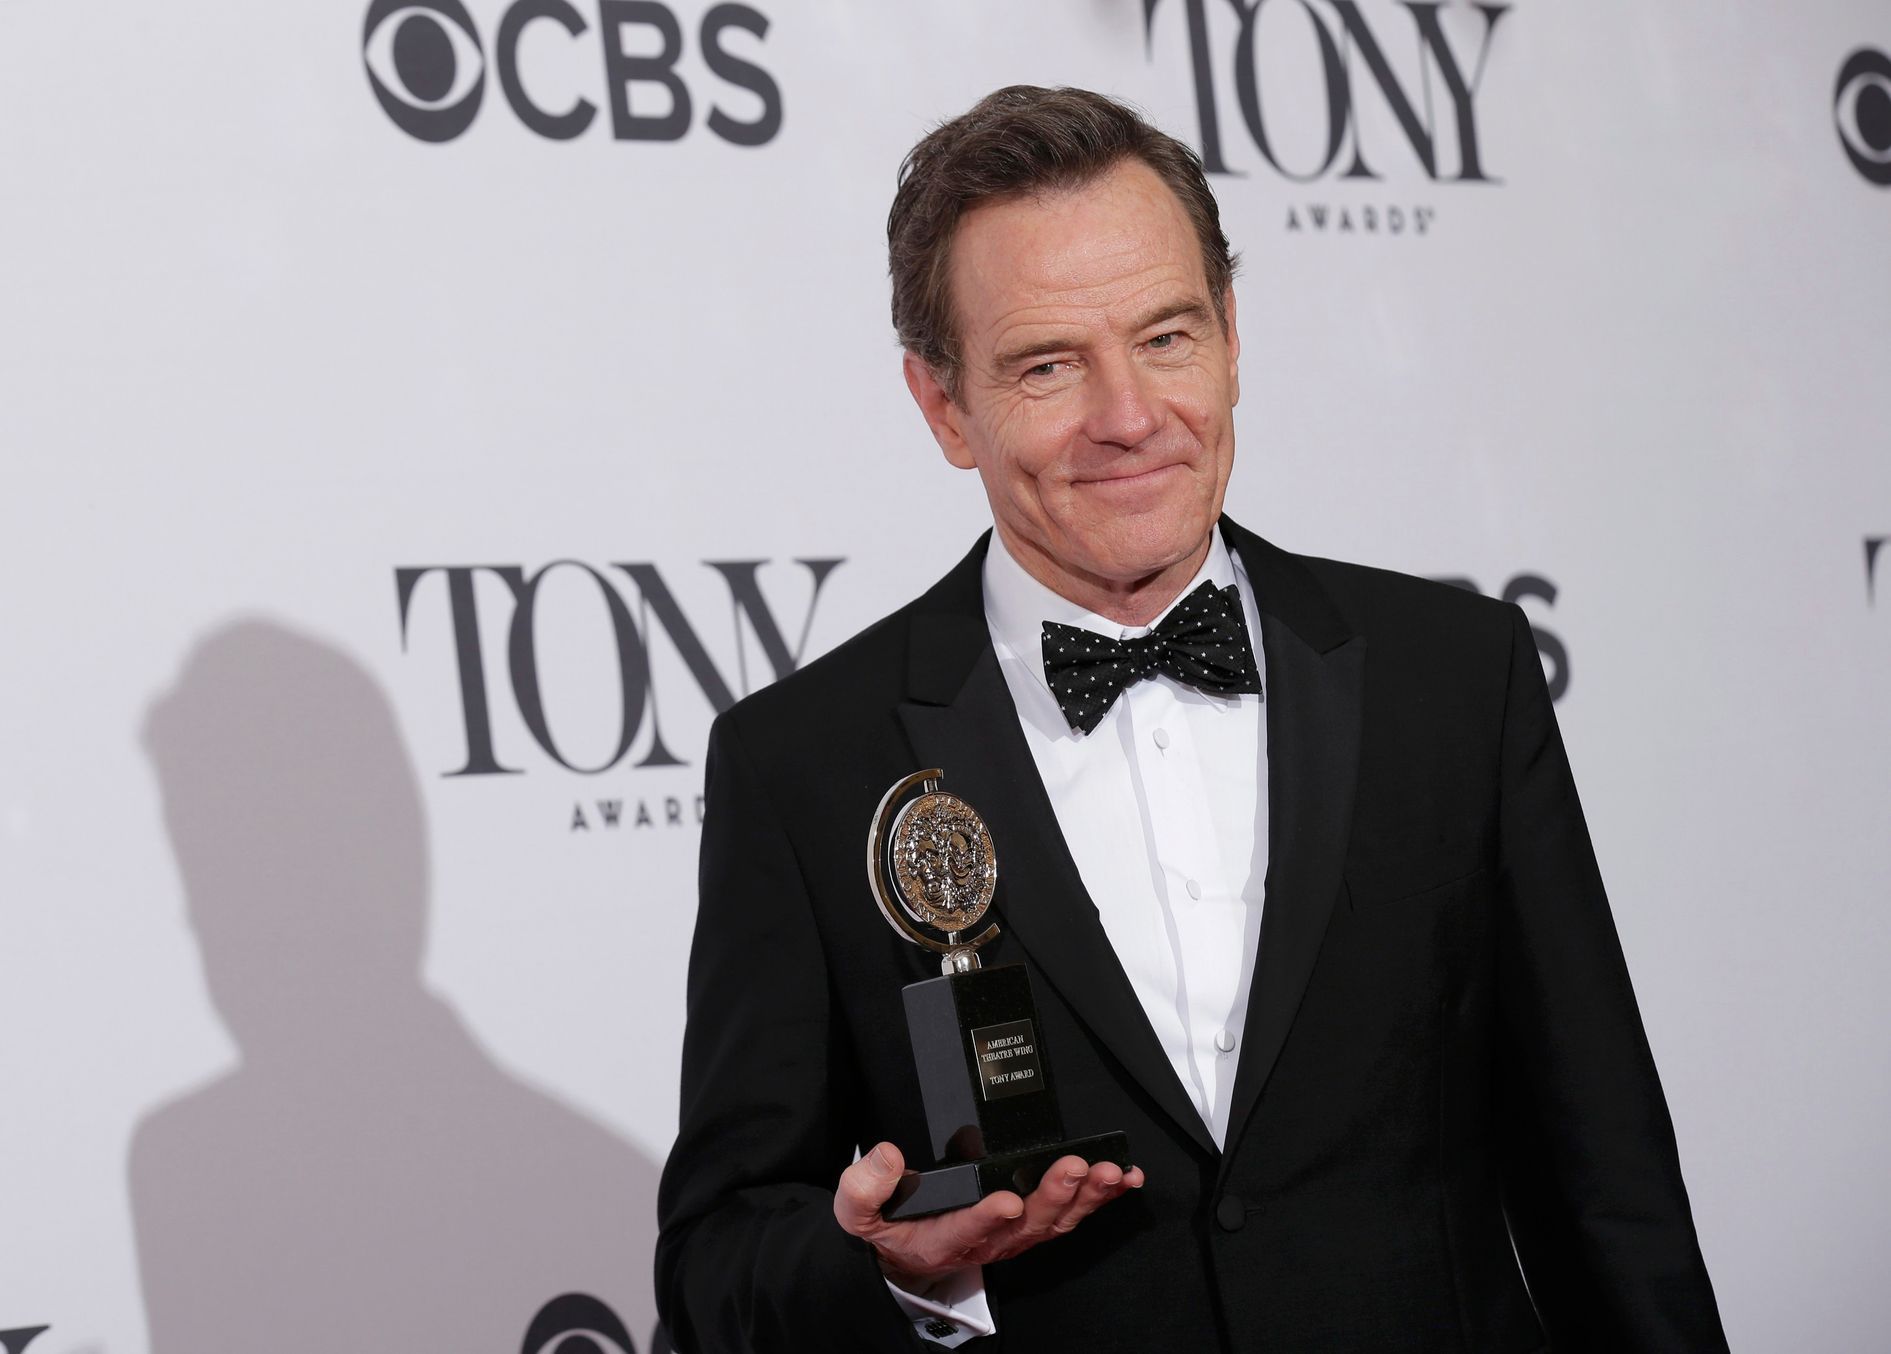 Actor Bryan Cranston poses backstage with his Tony Award at the American Theatre Wing's 68th annual Tony Awards at Radio City Music Hall in New York